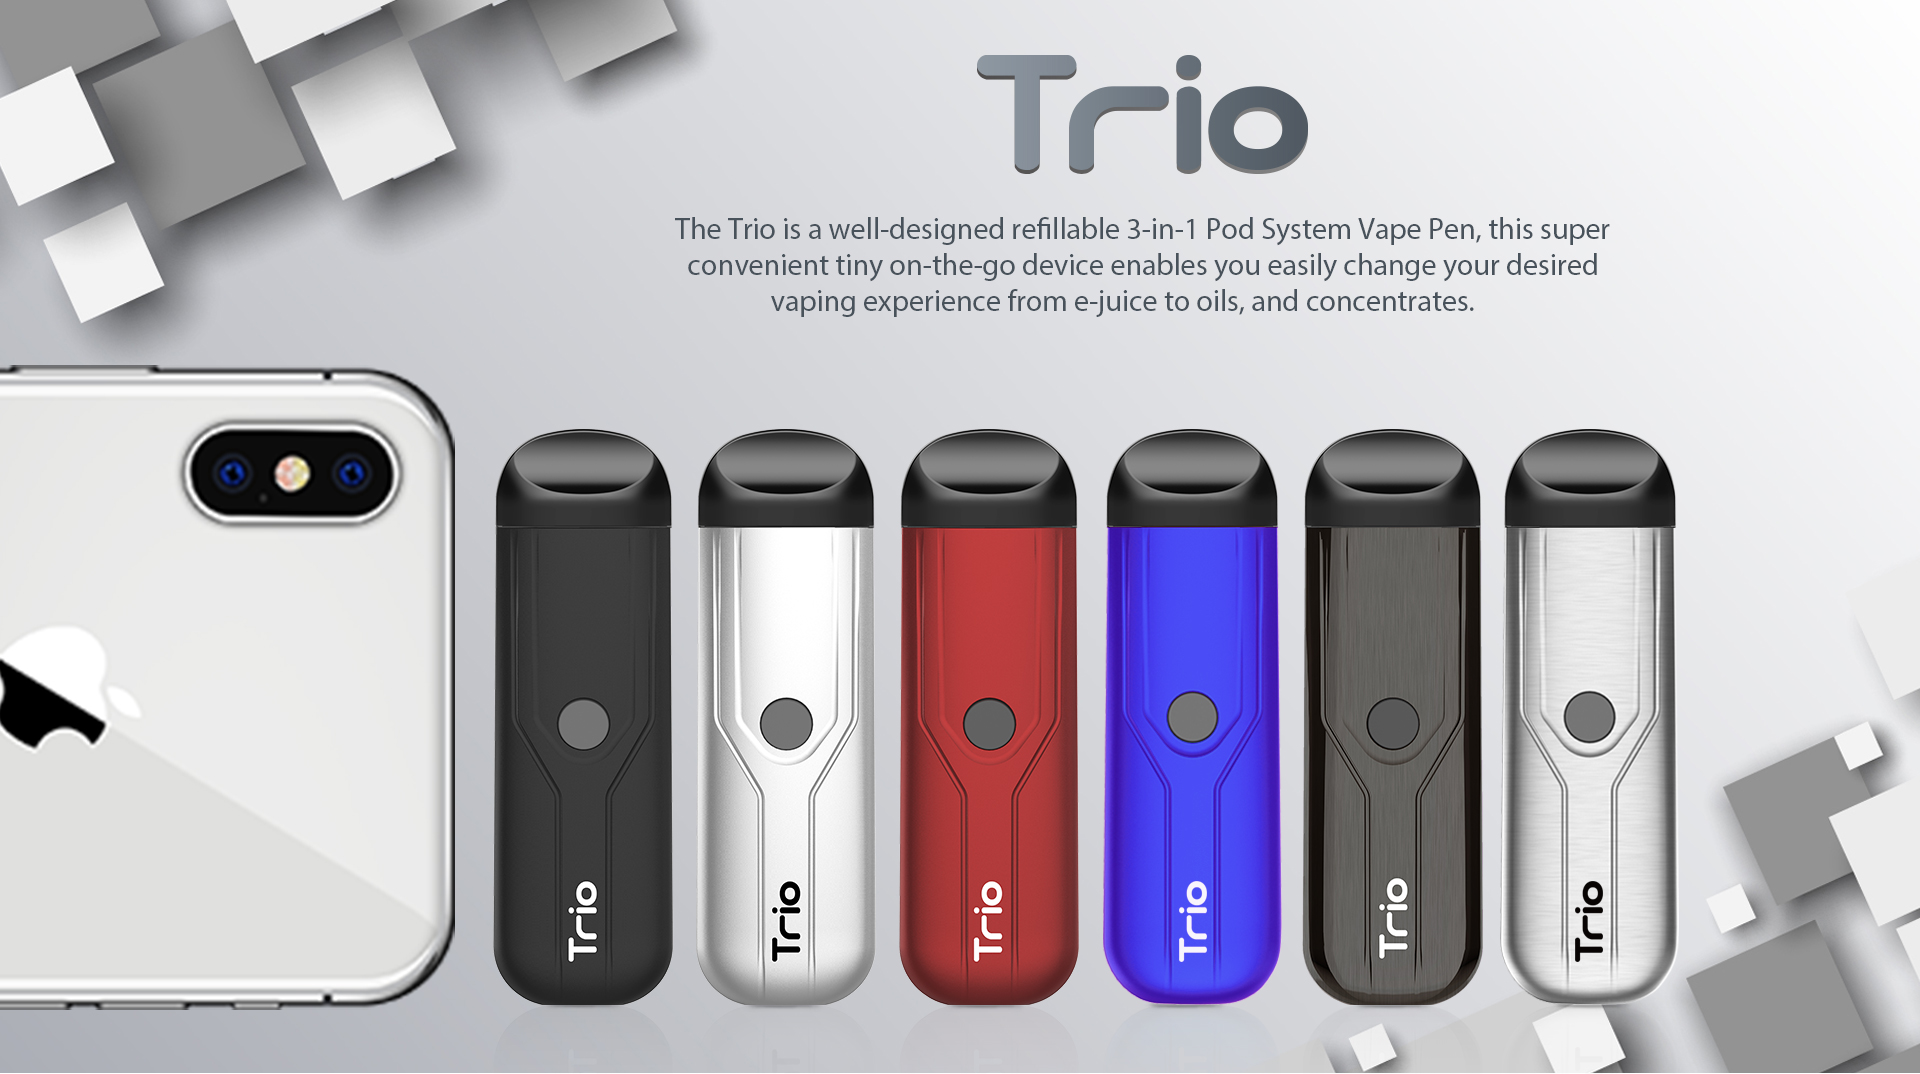 The Trio is a well-designed refillable 3-in-1 Pod System Vape Pen, this super convenient tiny on-the-go device enables you easily change your desired vaping experience from e-juice to oils, and concentrates.